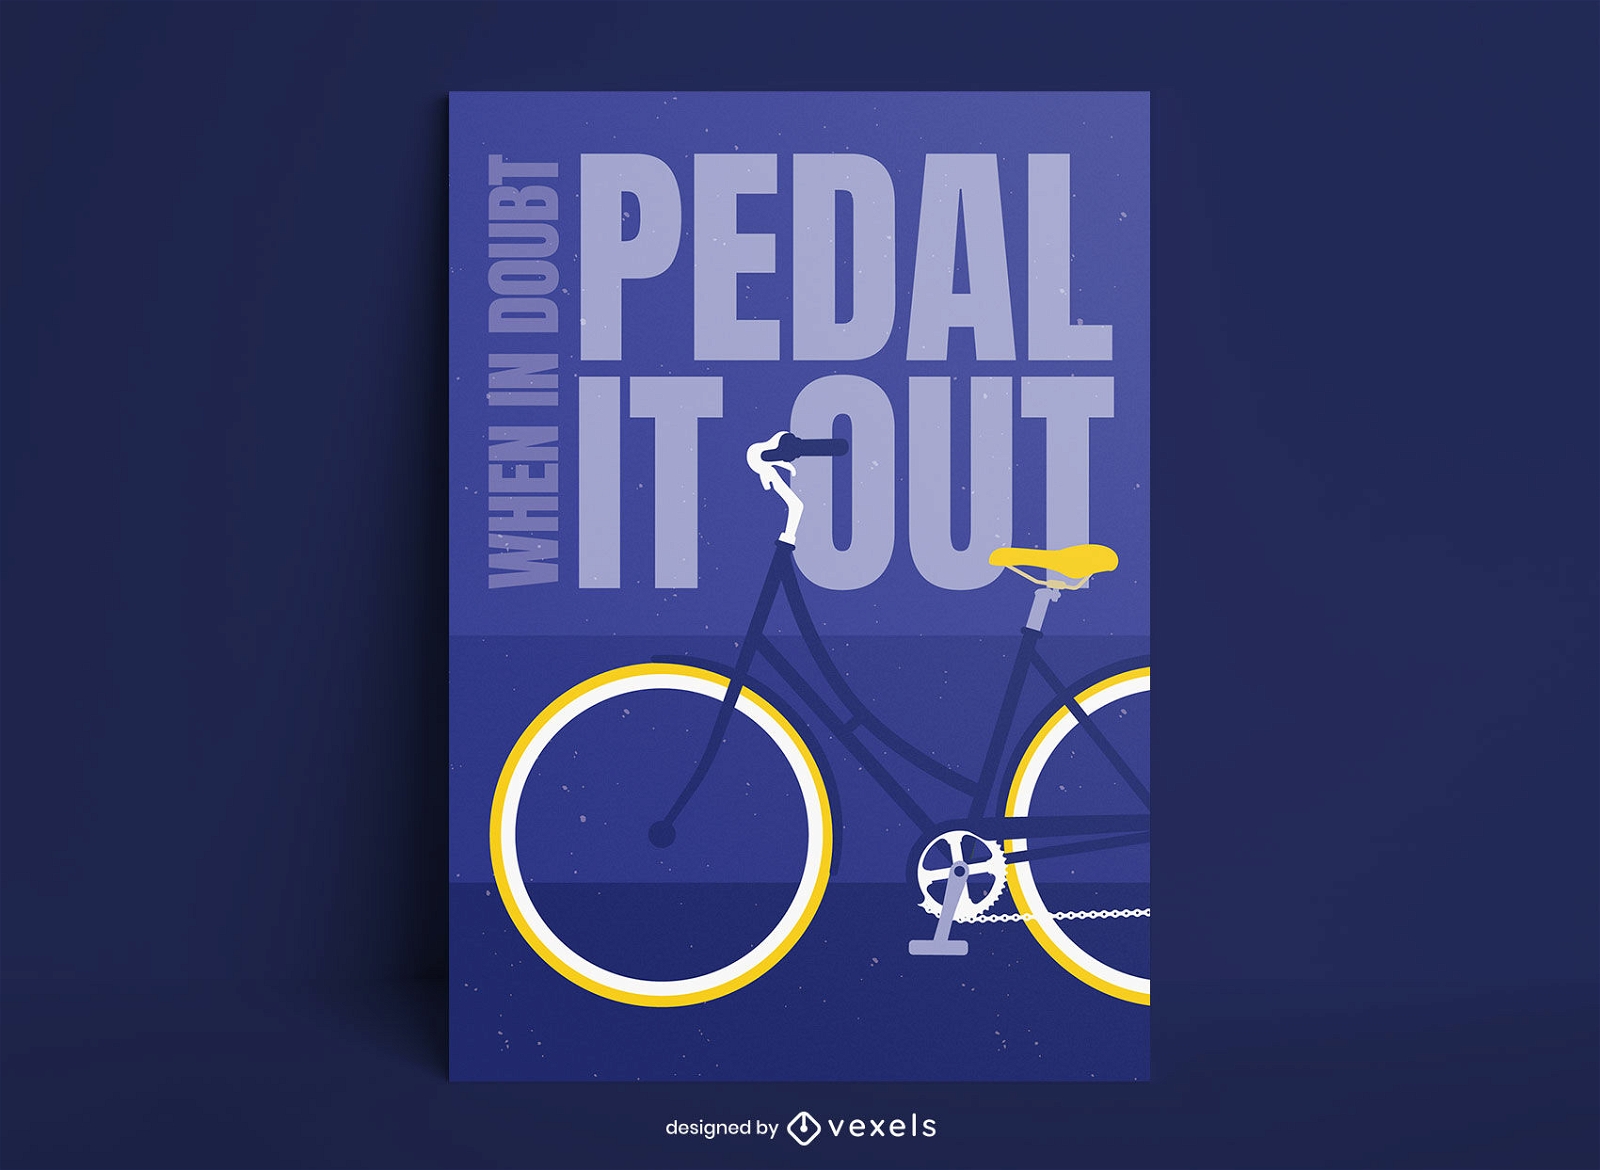 Flat cycling quote poster